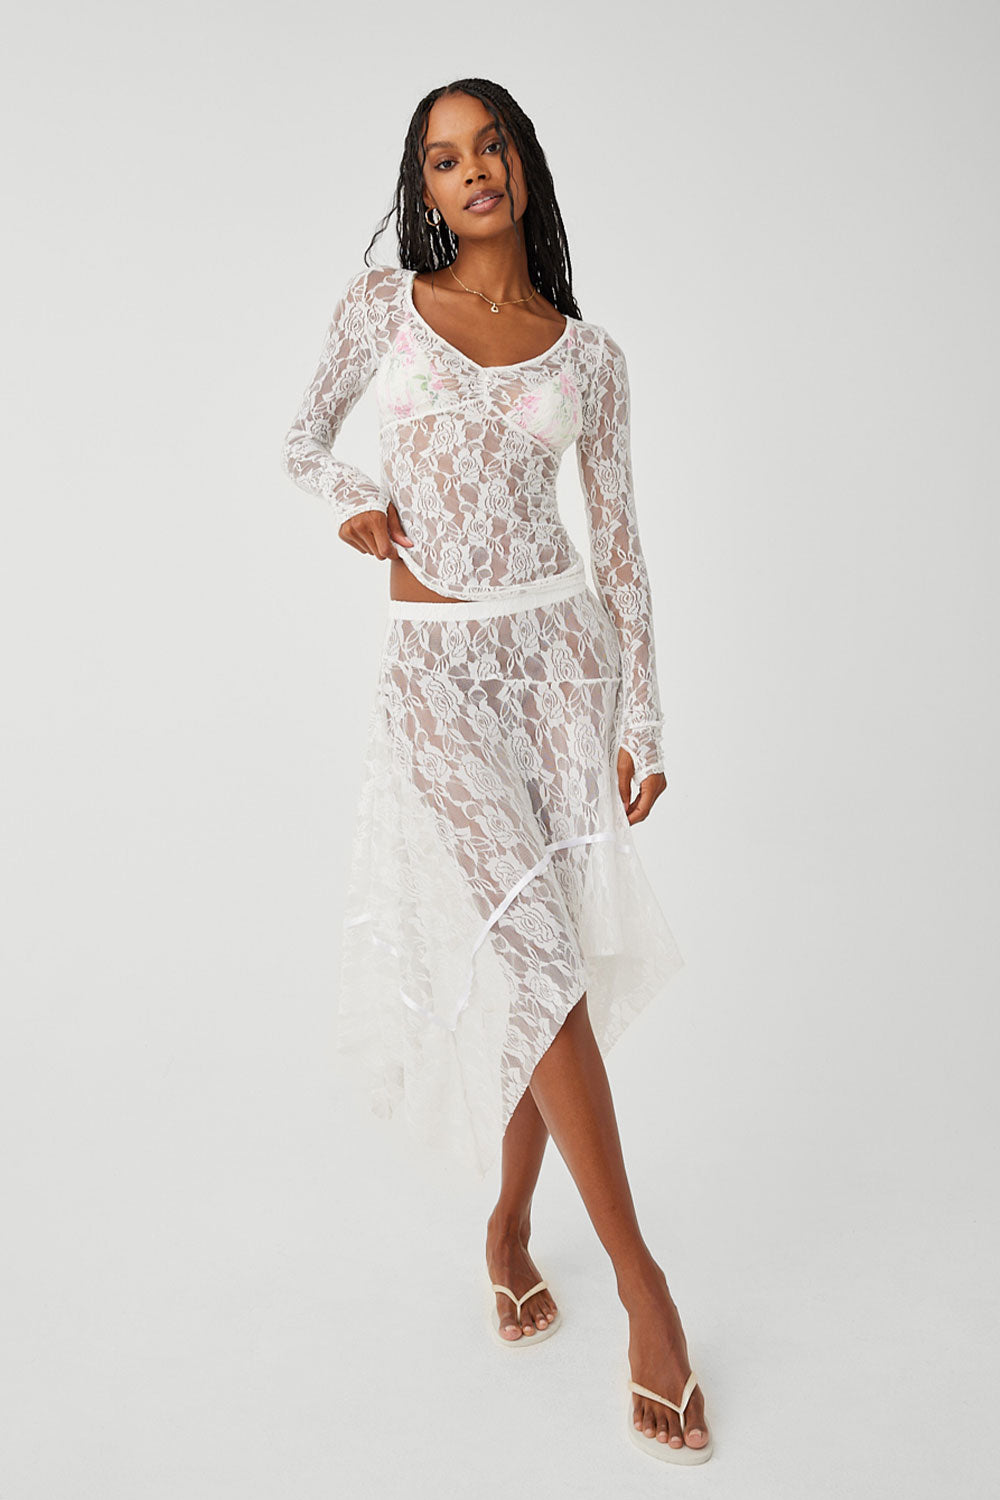 Sweeten the Occasion White Lace Long Sleeve Top